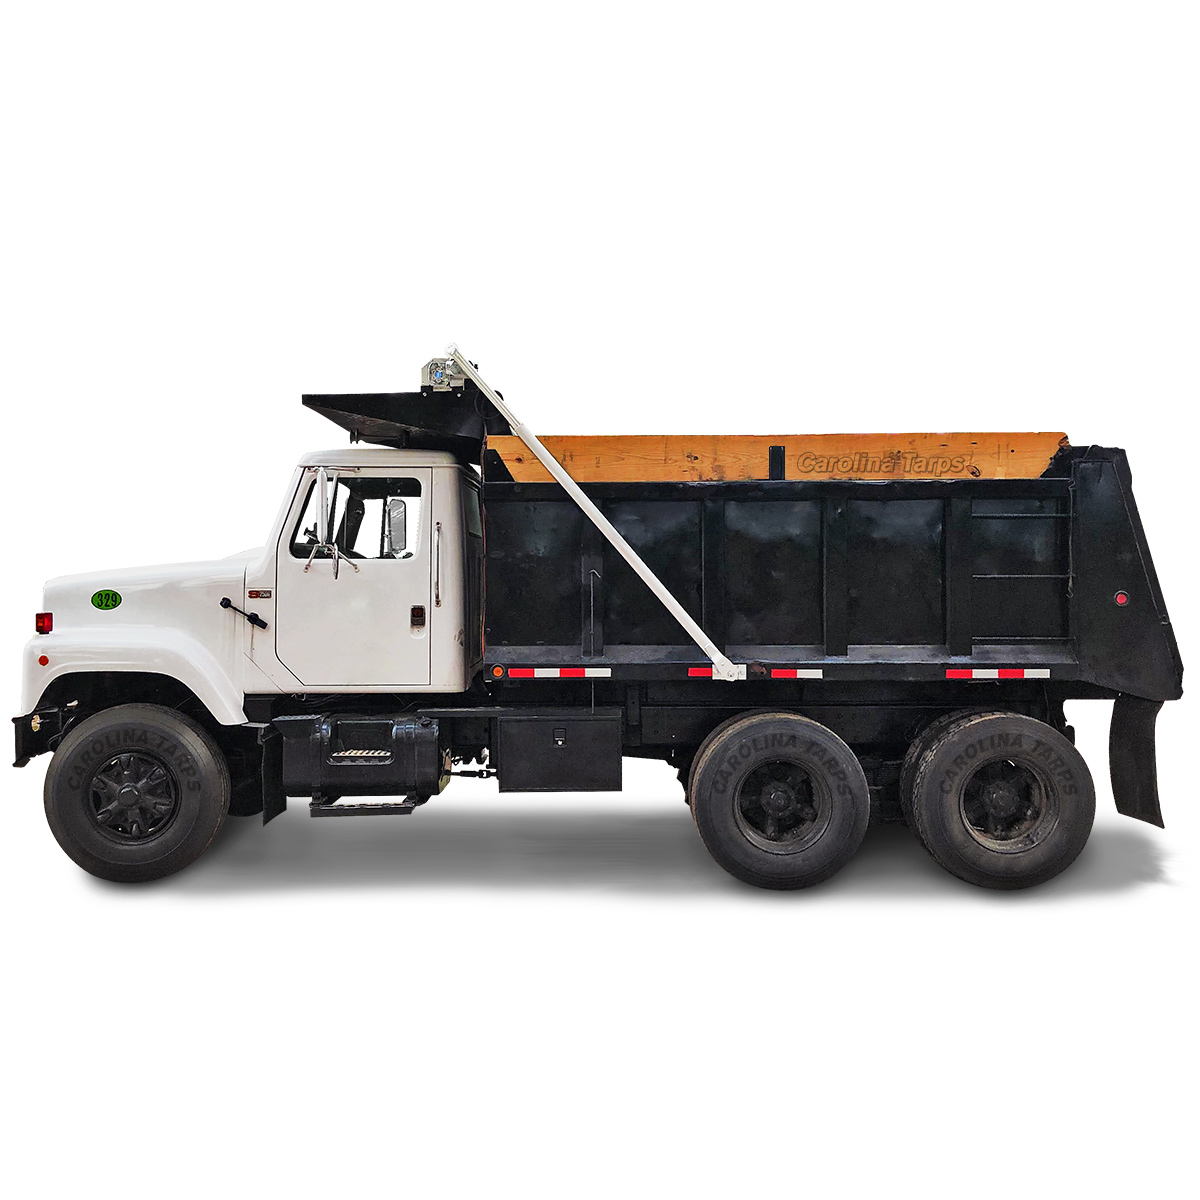 Electric Tarp System for Dump Trucks - ALUMINUM 4 Spring Tarp Kit for Beds Up to 24 Long and UNDER 95" Wide